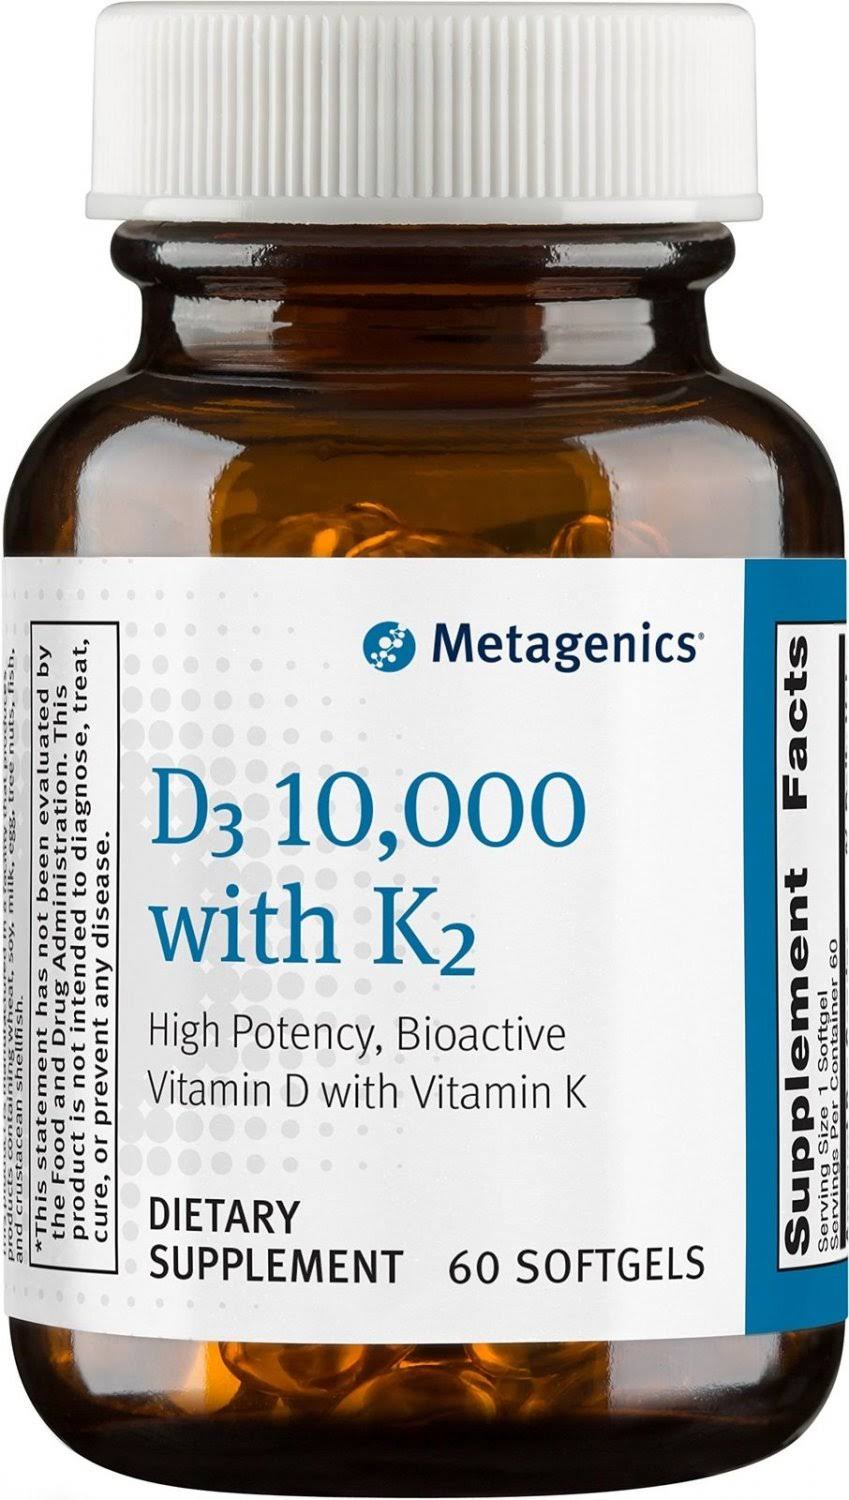 Metagenics D3 10,000 with K2 - 60 Softgels